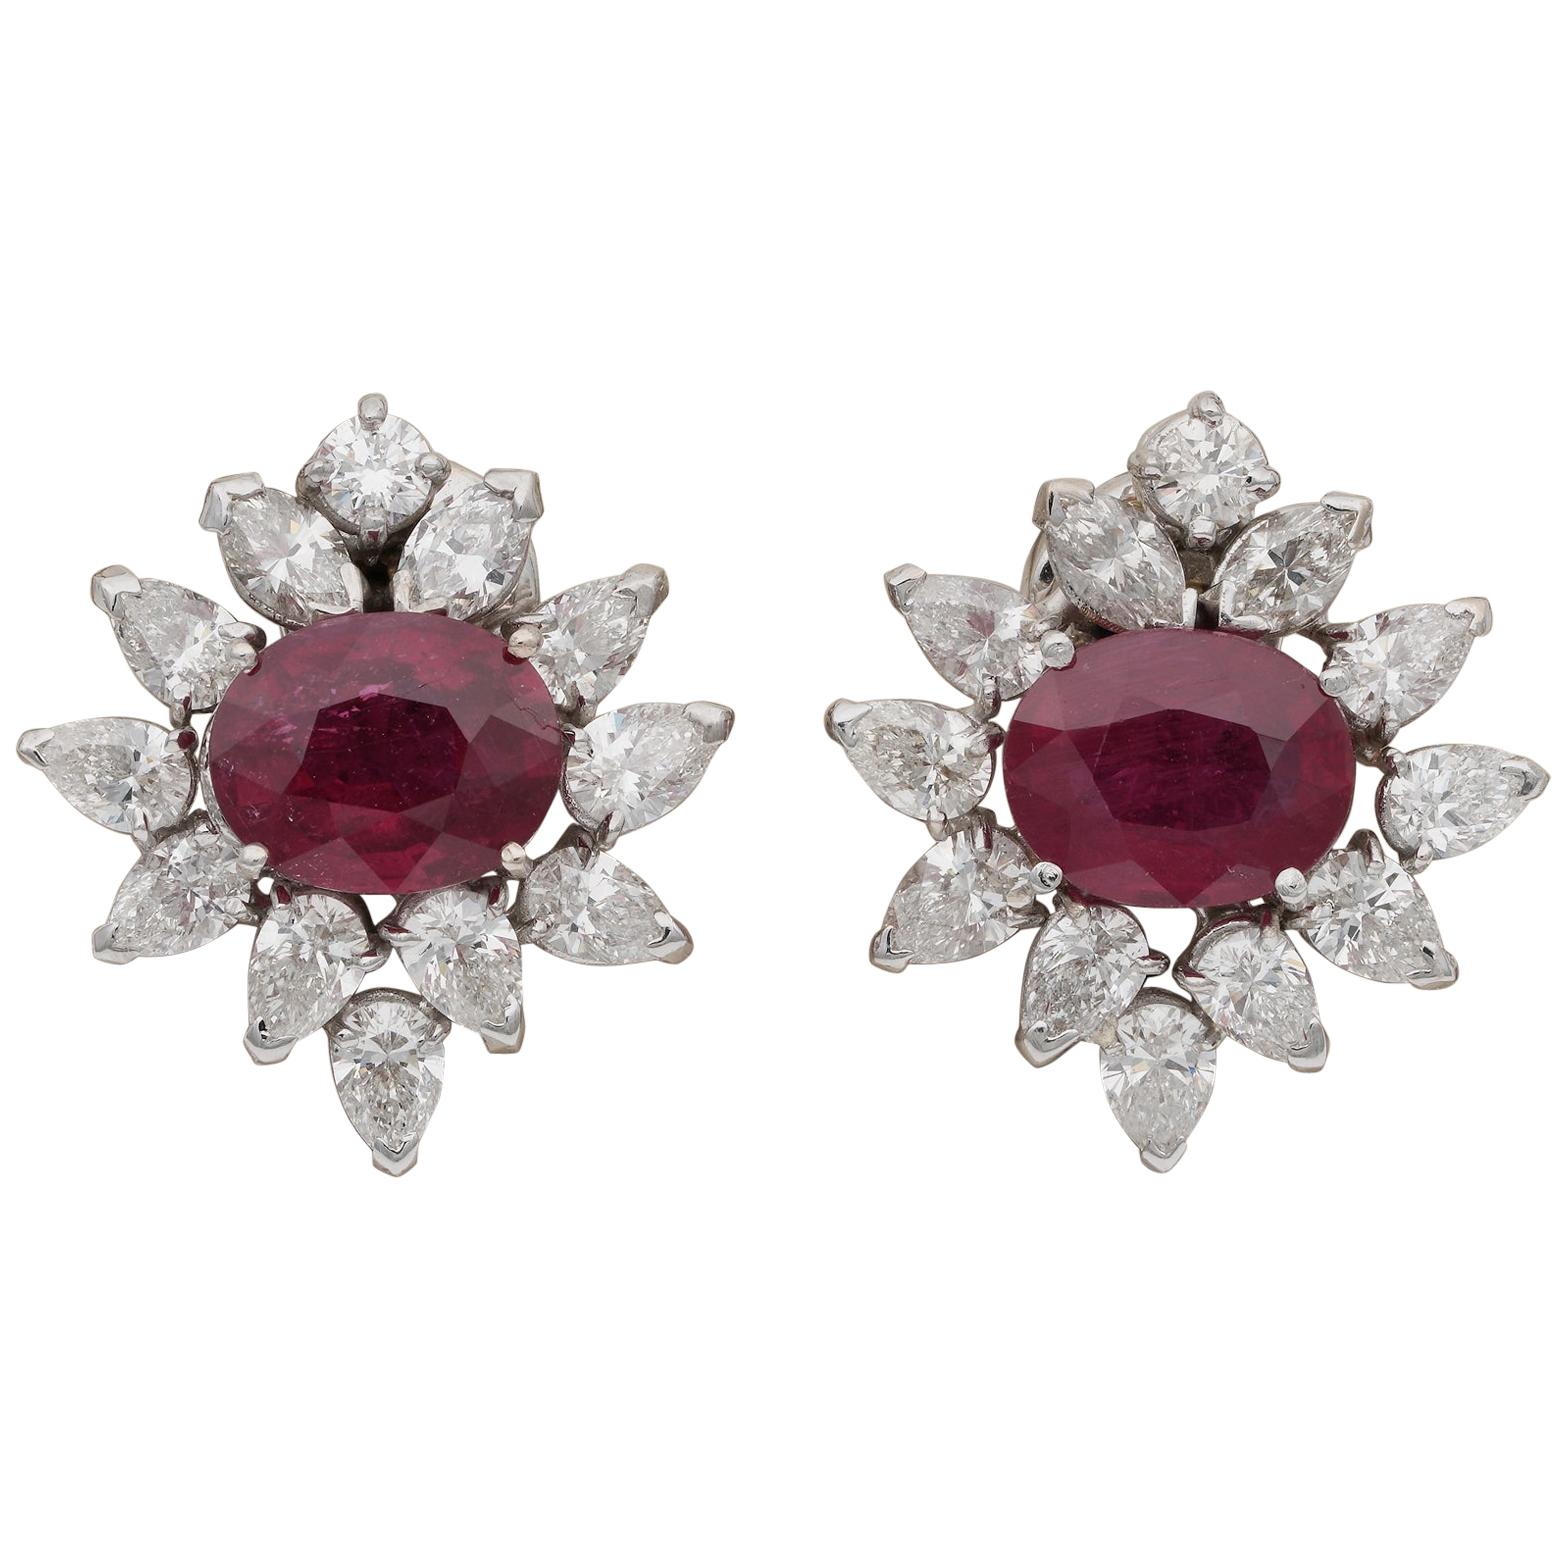 Magnificent 6.46 Carat Natural Ruby 4.60 Carat Diamond Midcentury Earrings For Sale